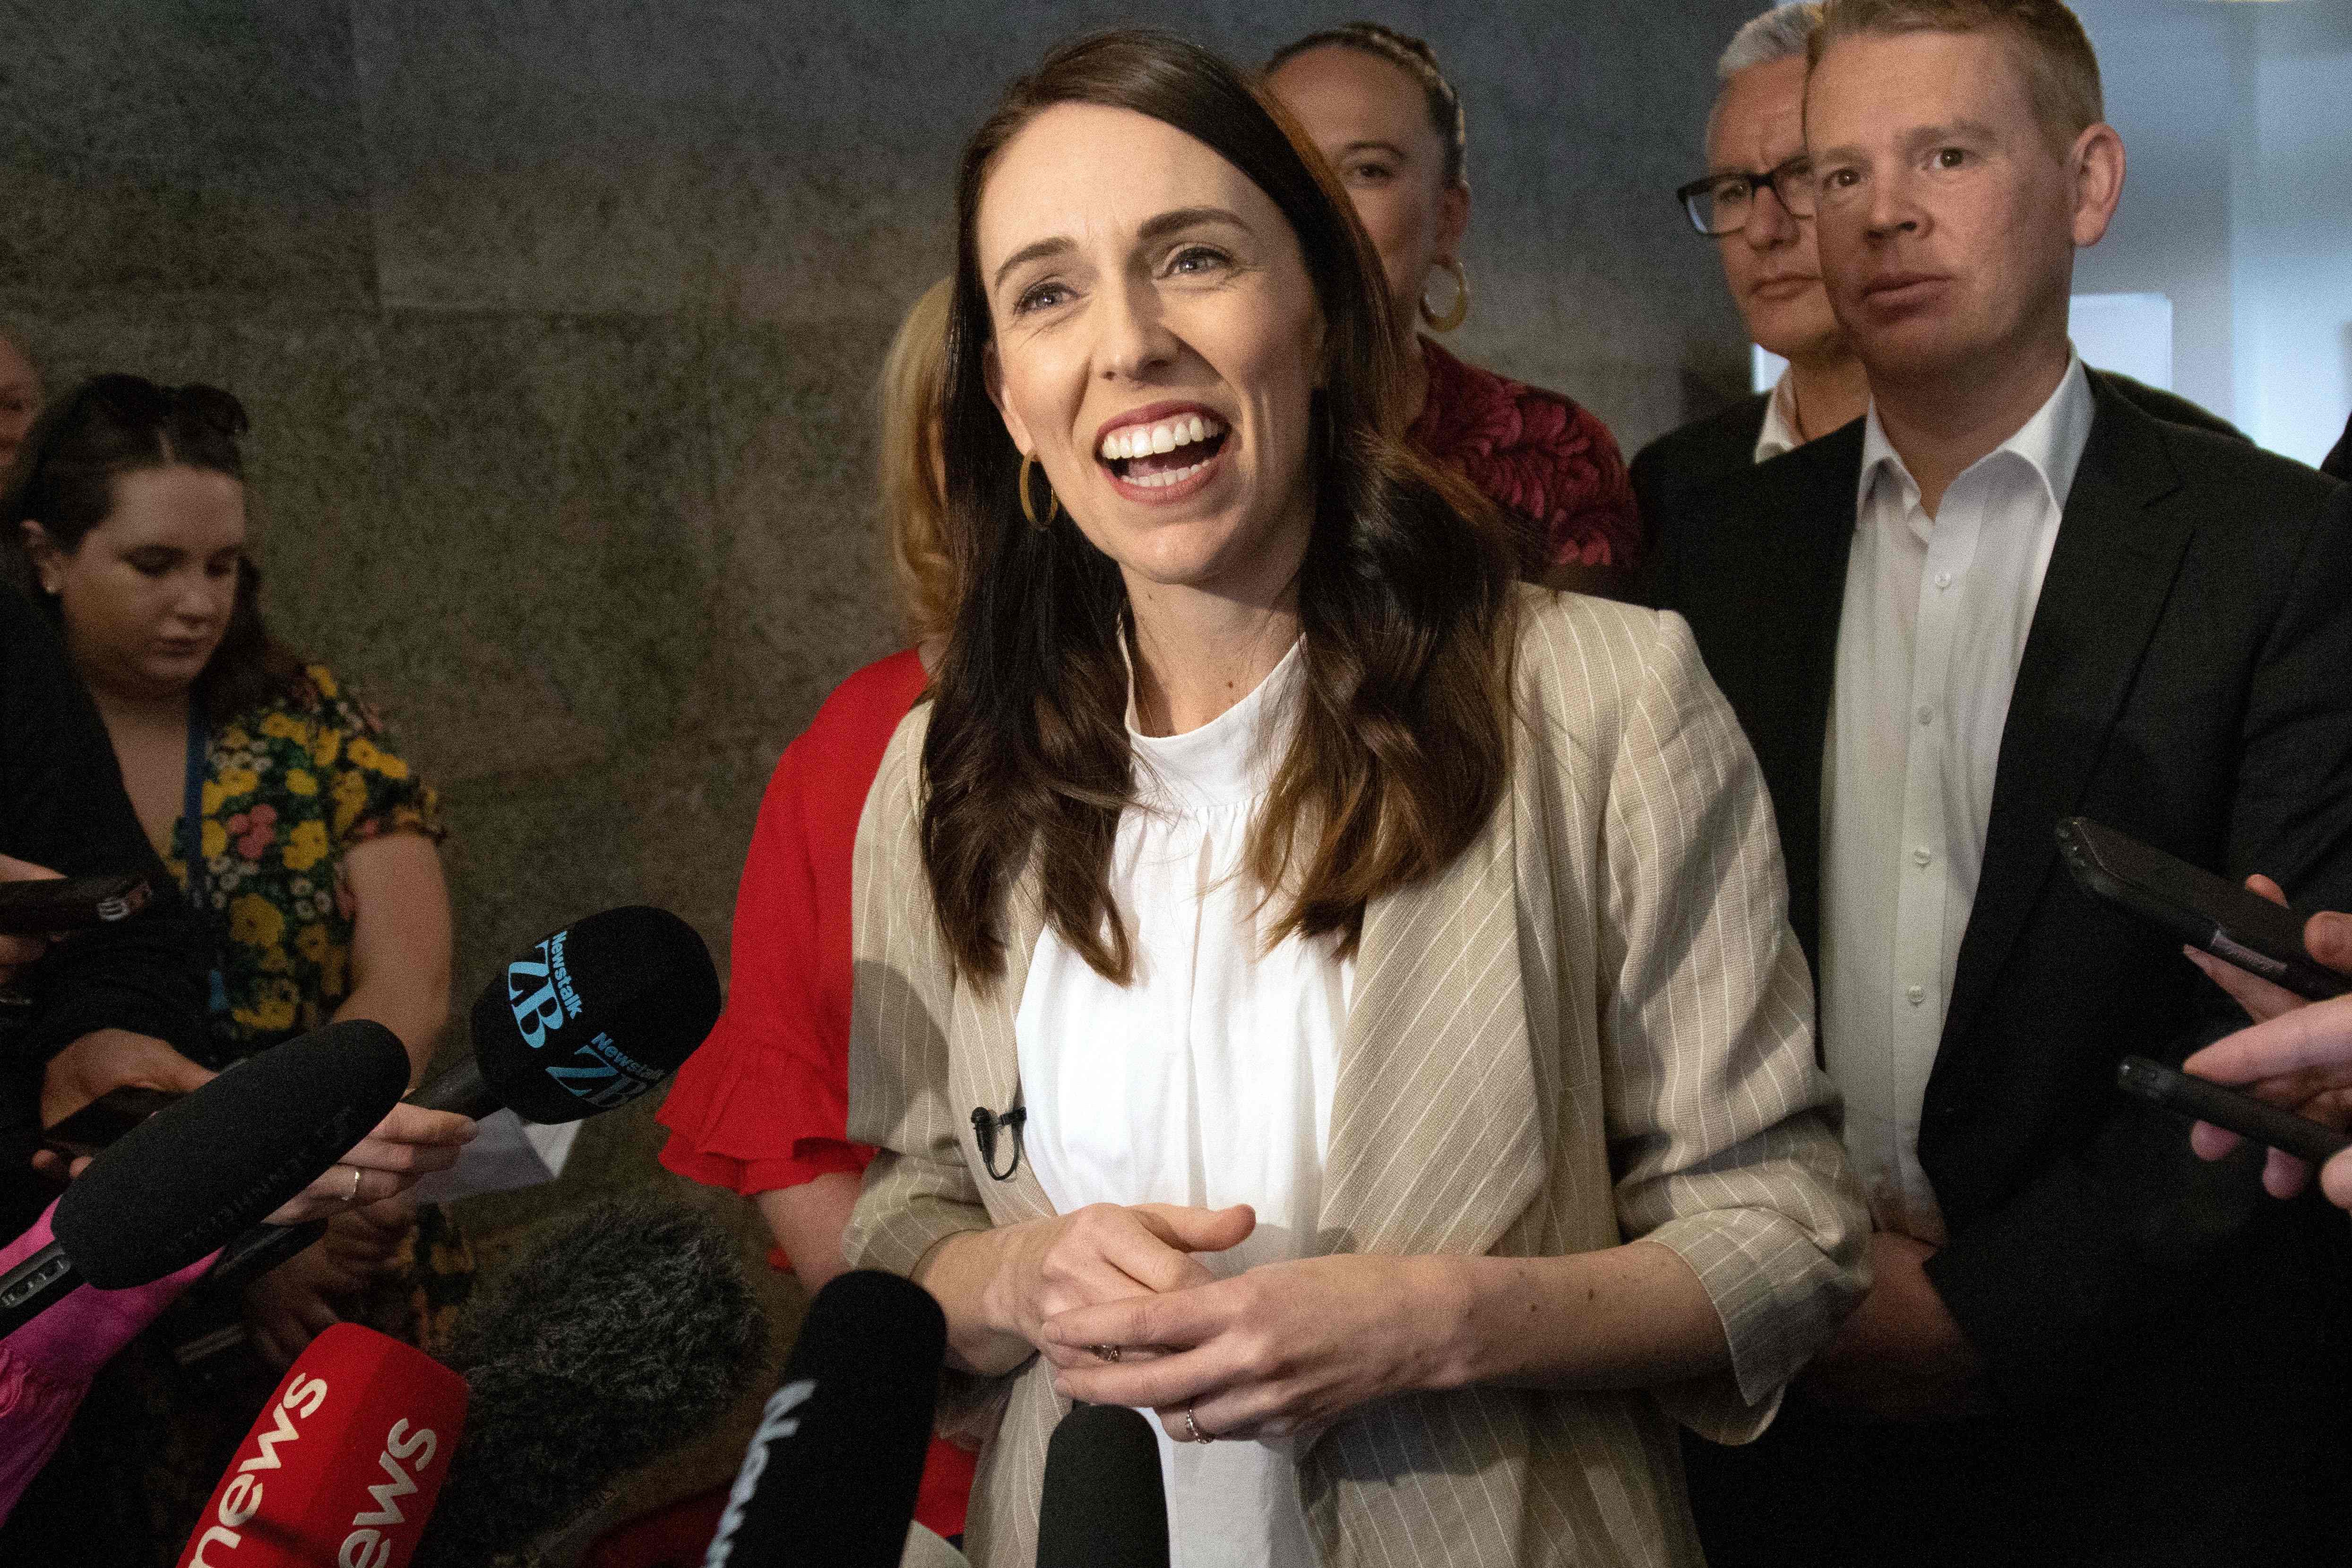 Jacinda Ardern speaks to the media a day after her landslide election win, in Auckland on Sunday